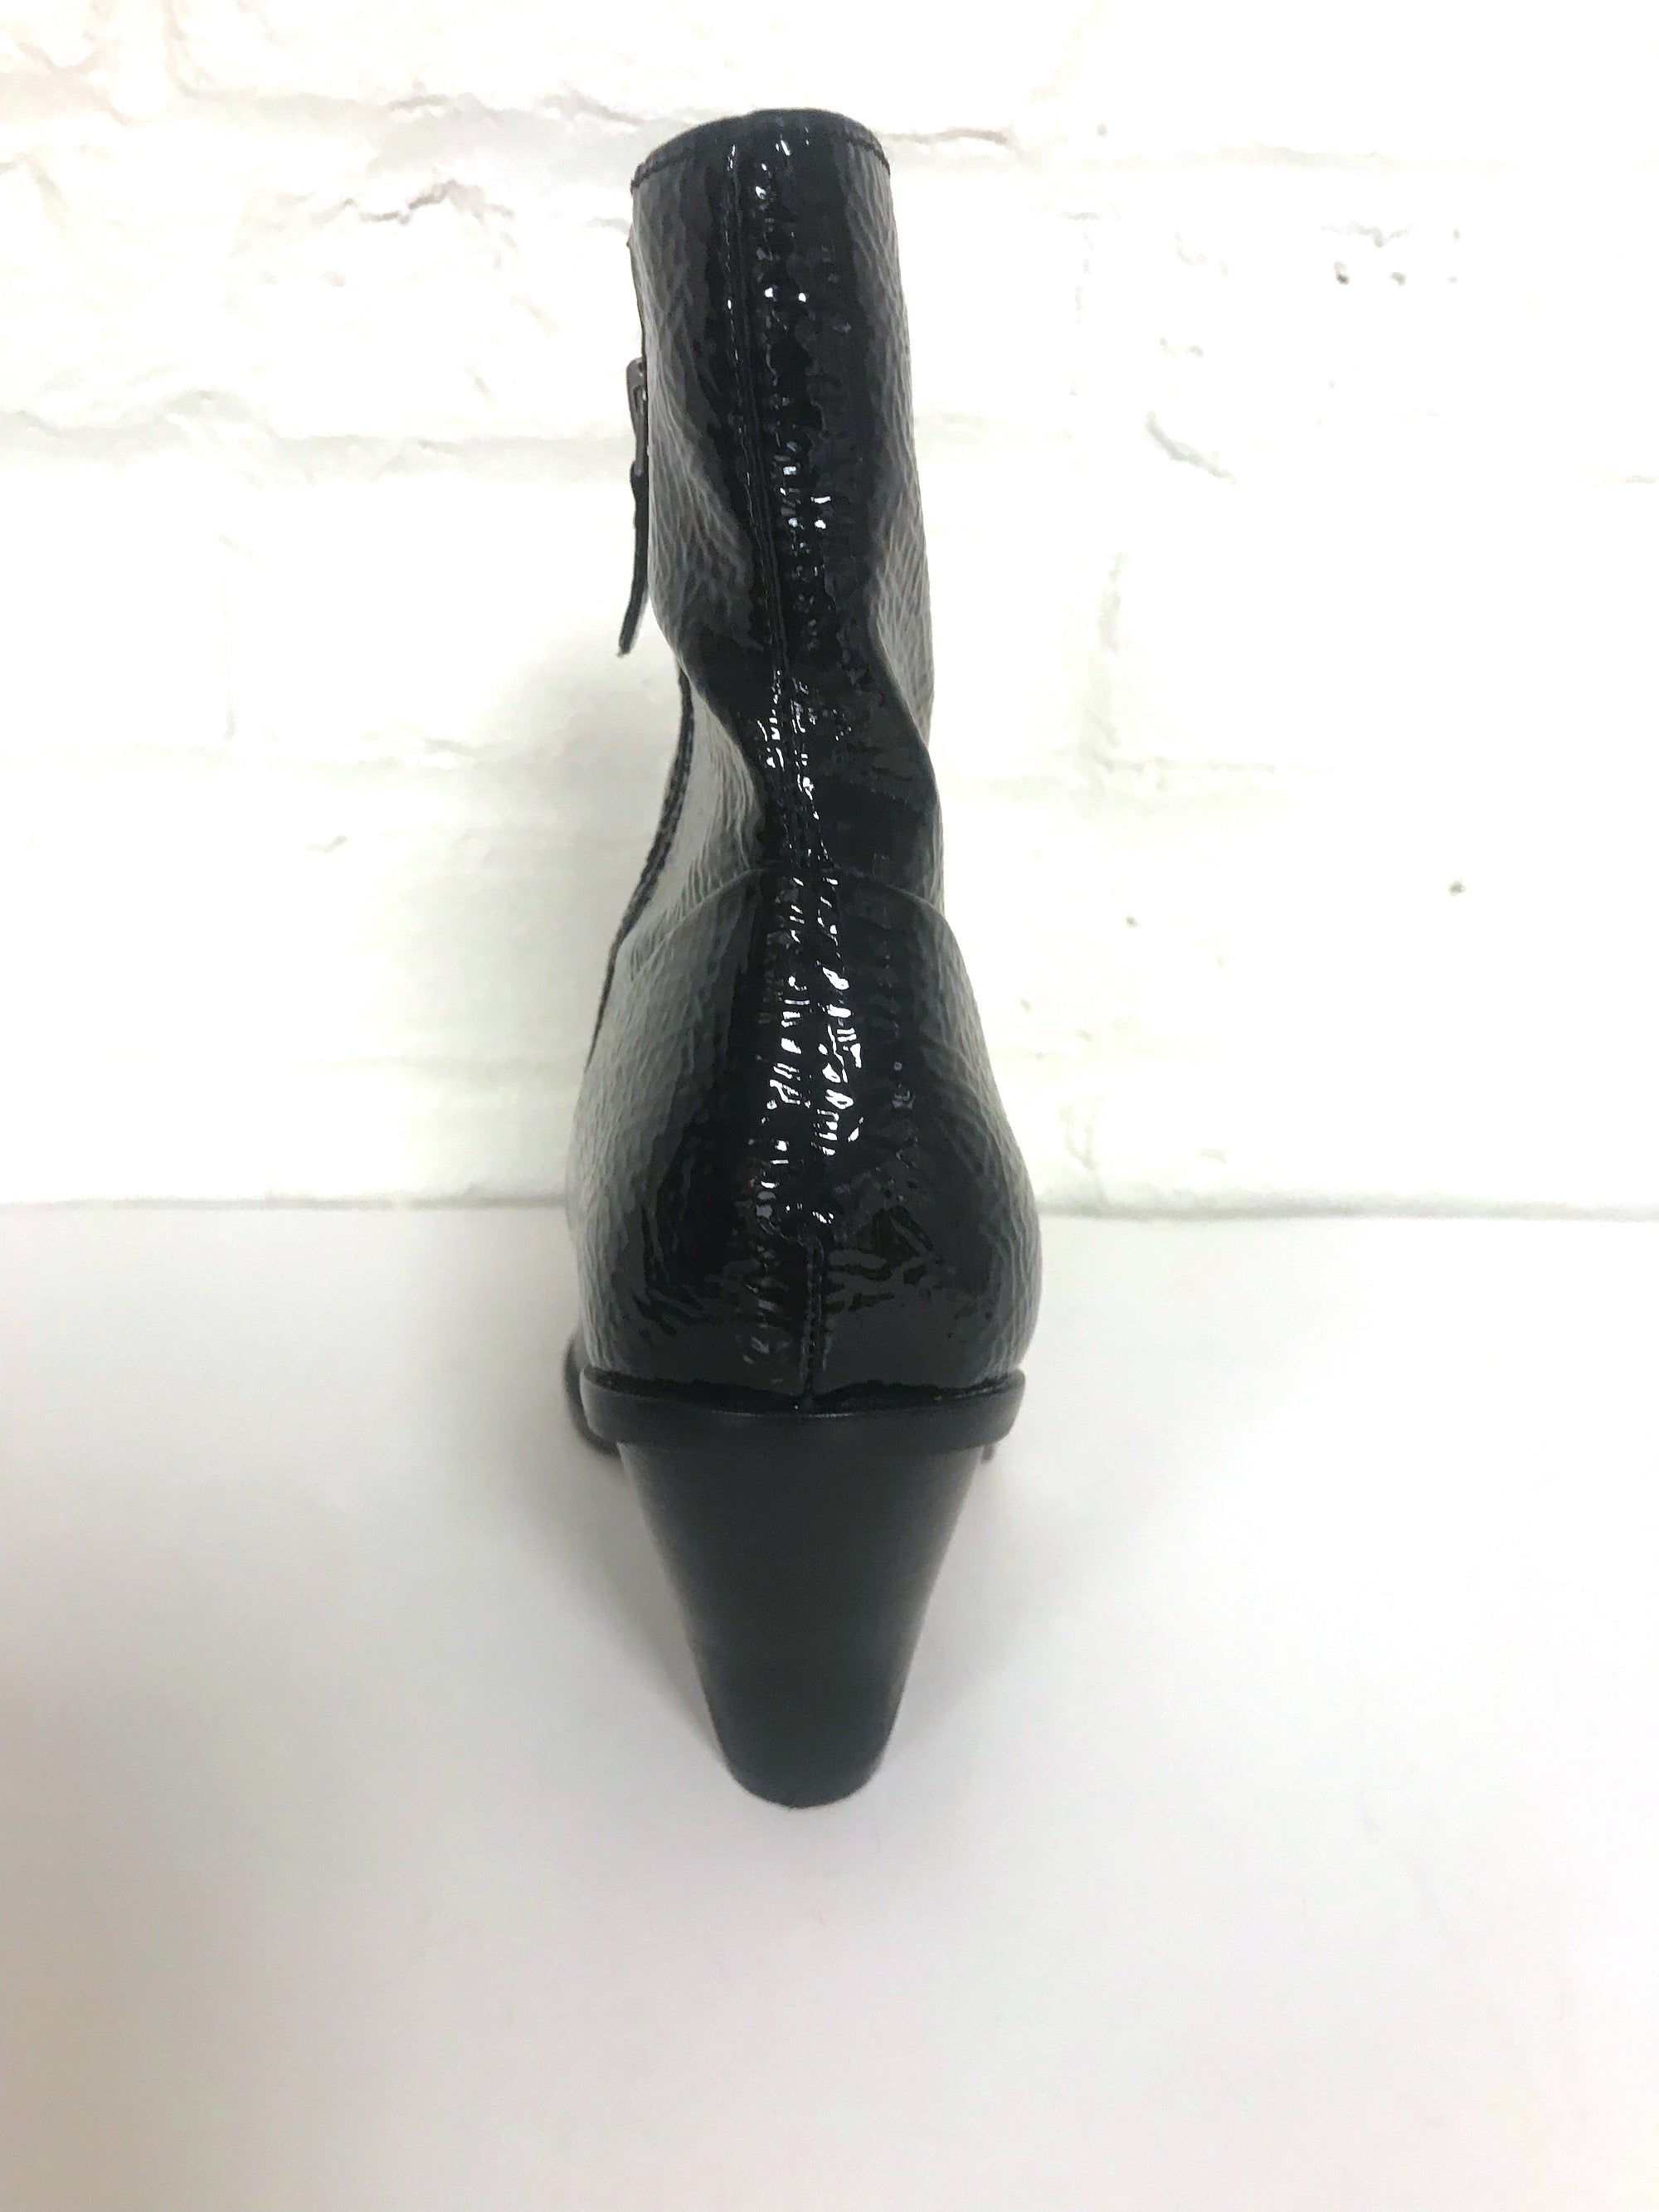 Patent Leather Zipper Boots